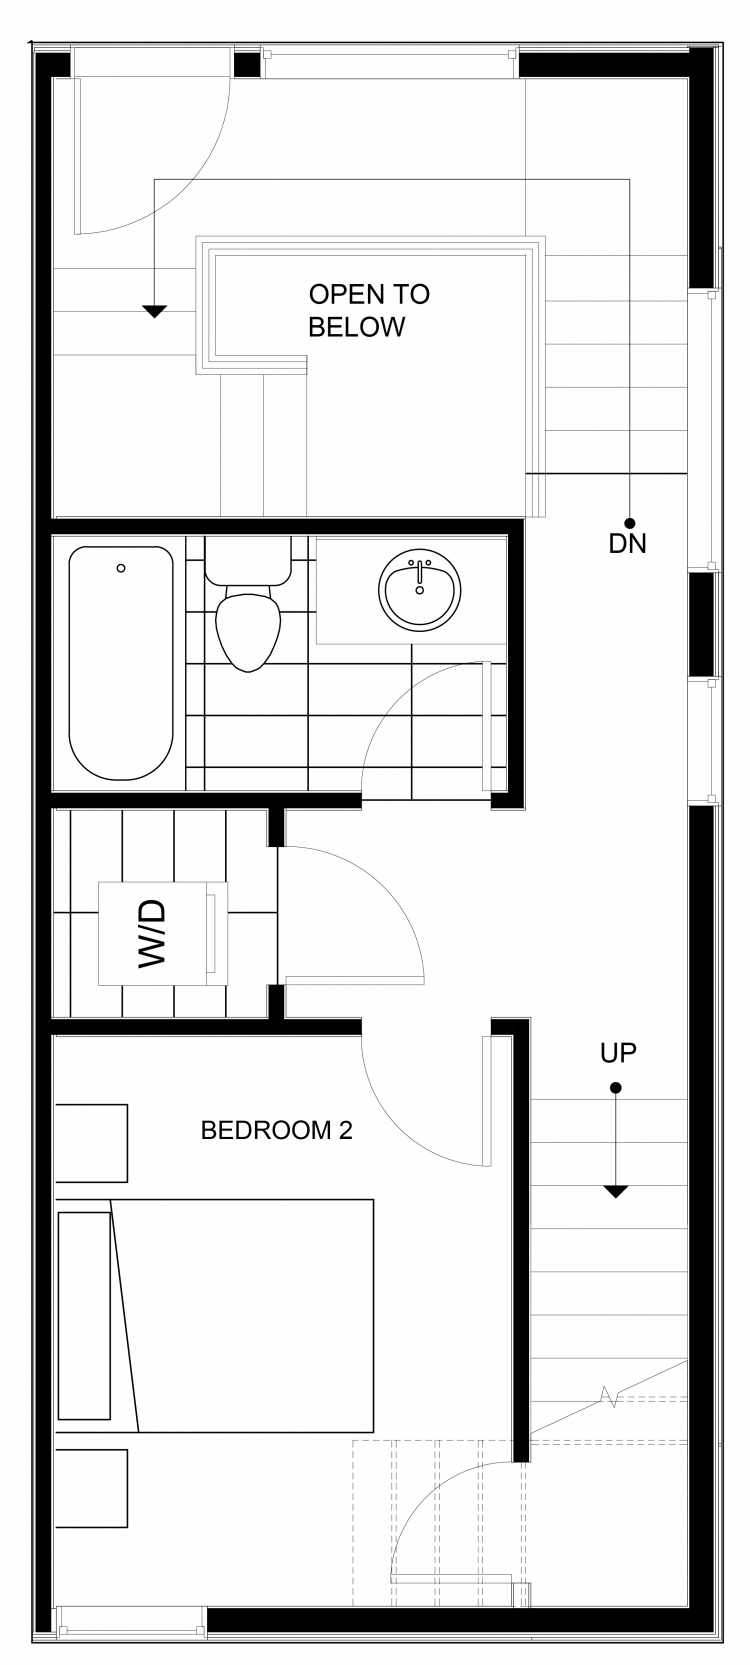 Second Floor Plan of 1539 Grandview Pl E, One of the Grandview Townhomes in Capitol Hill